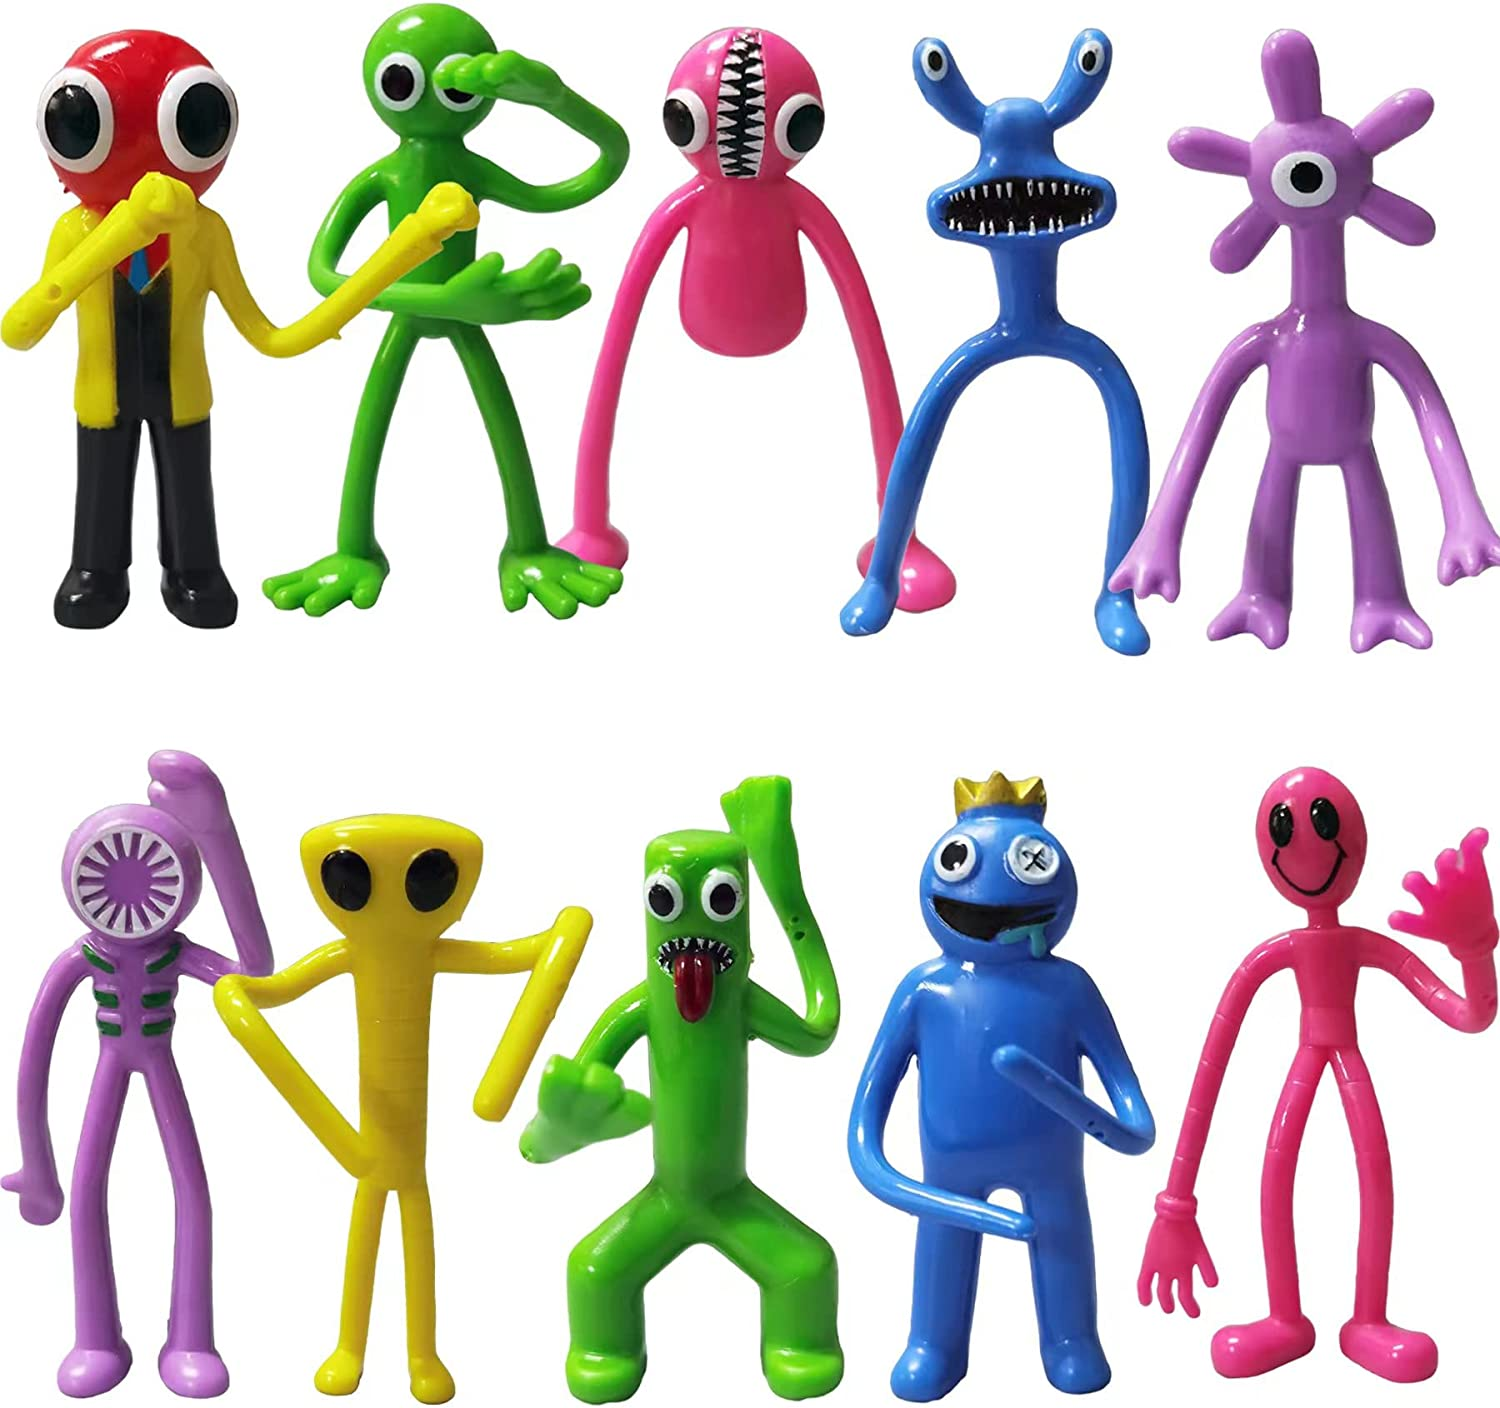 Rainbow friends toys rainbow friends action figures toys gaming action figures g